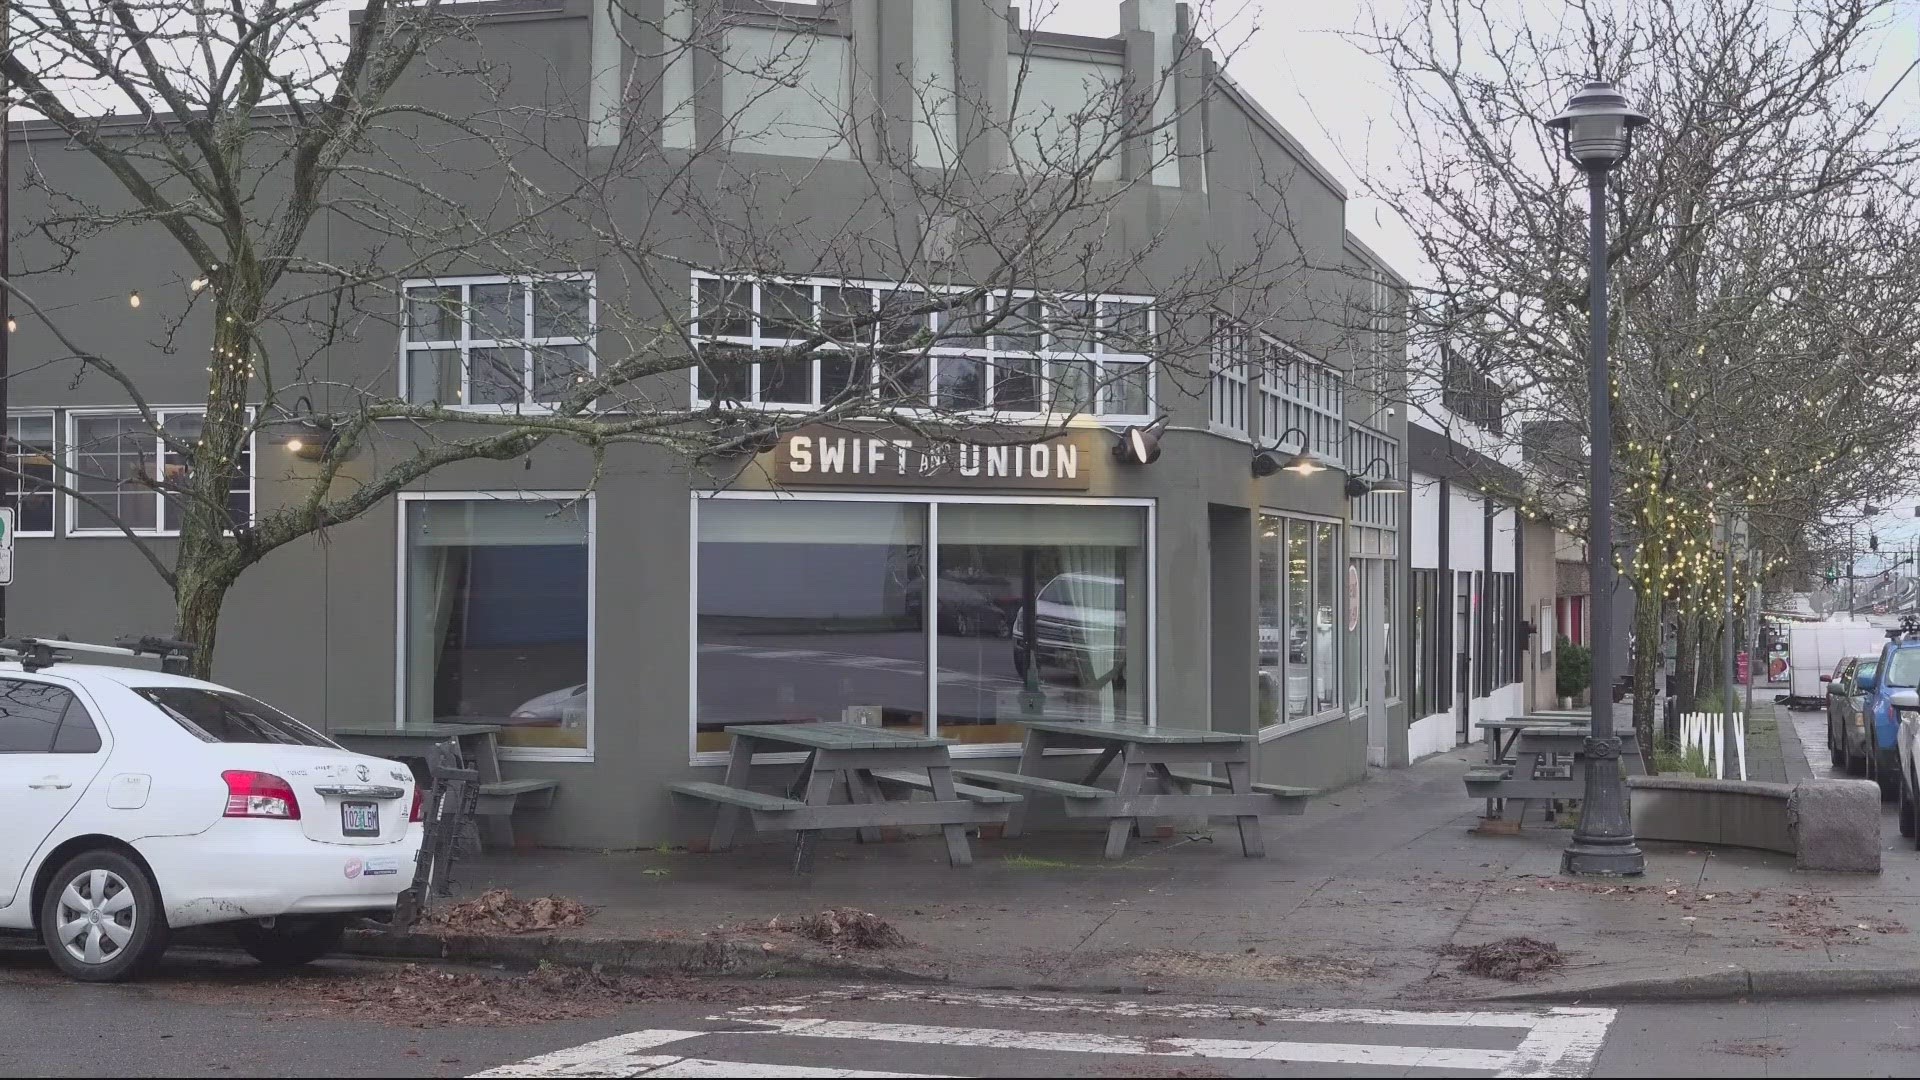 Swift and Union announced it's closing on December 23. The restaurant has been in the Kenton neighborhood of North Portland for nearly 10 years.